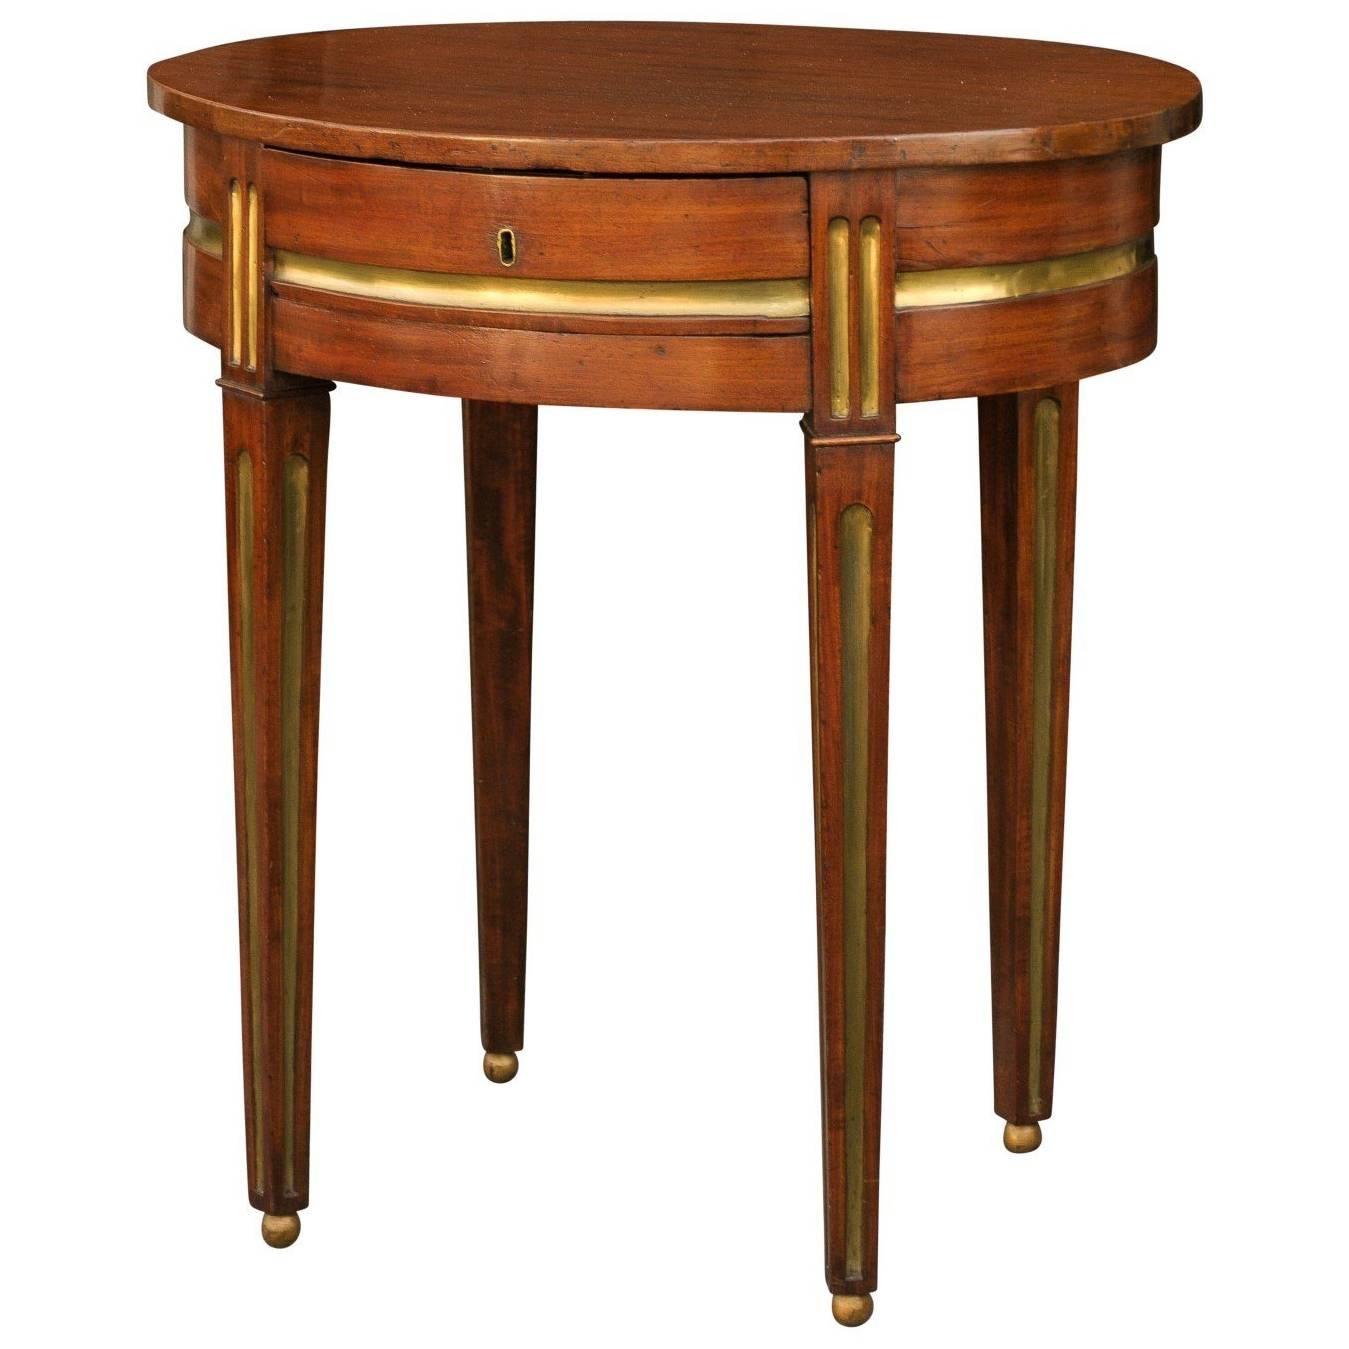 Russian 19th century Mahogany Oval Side Table with Brass Inlaid Elements 